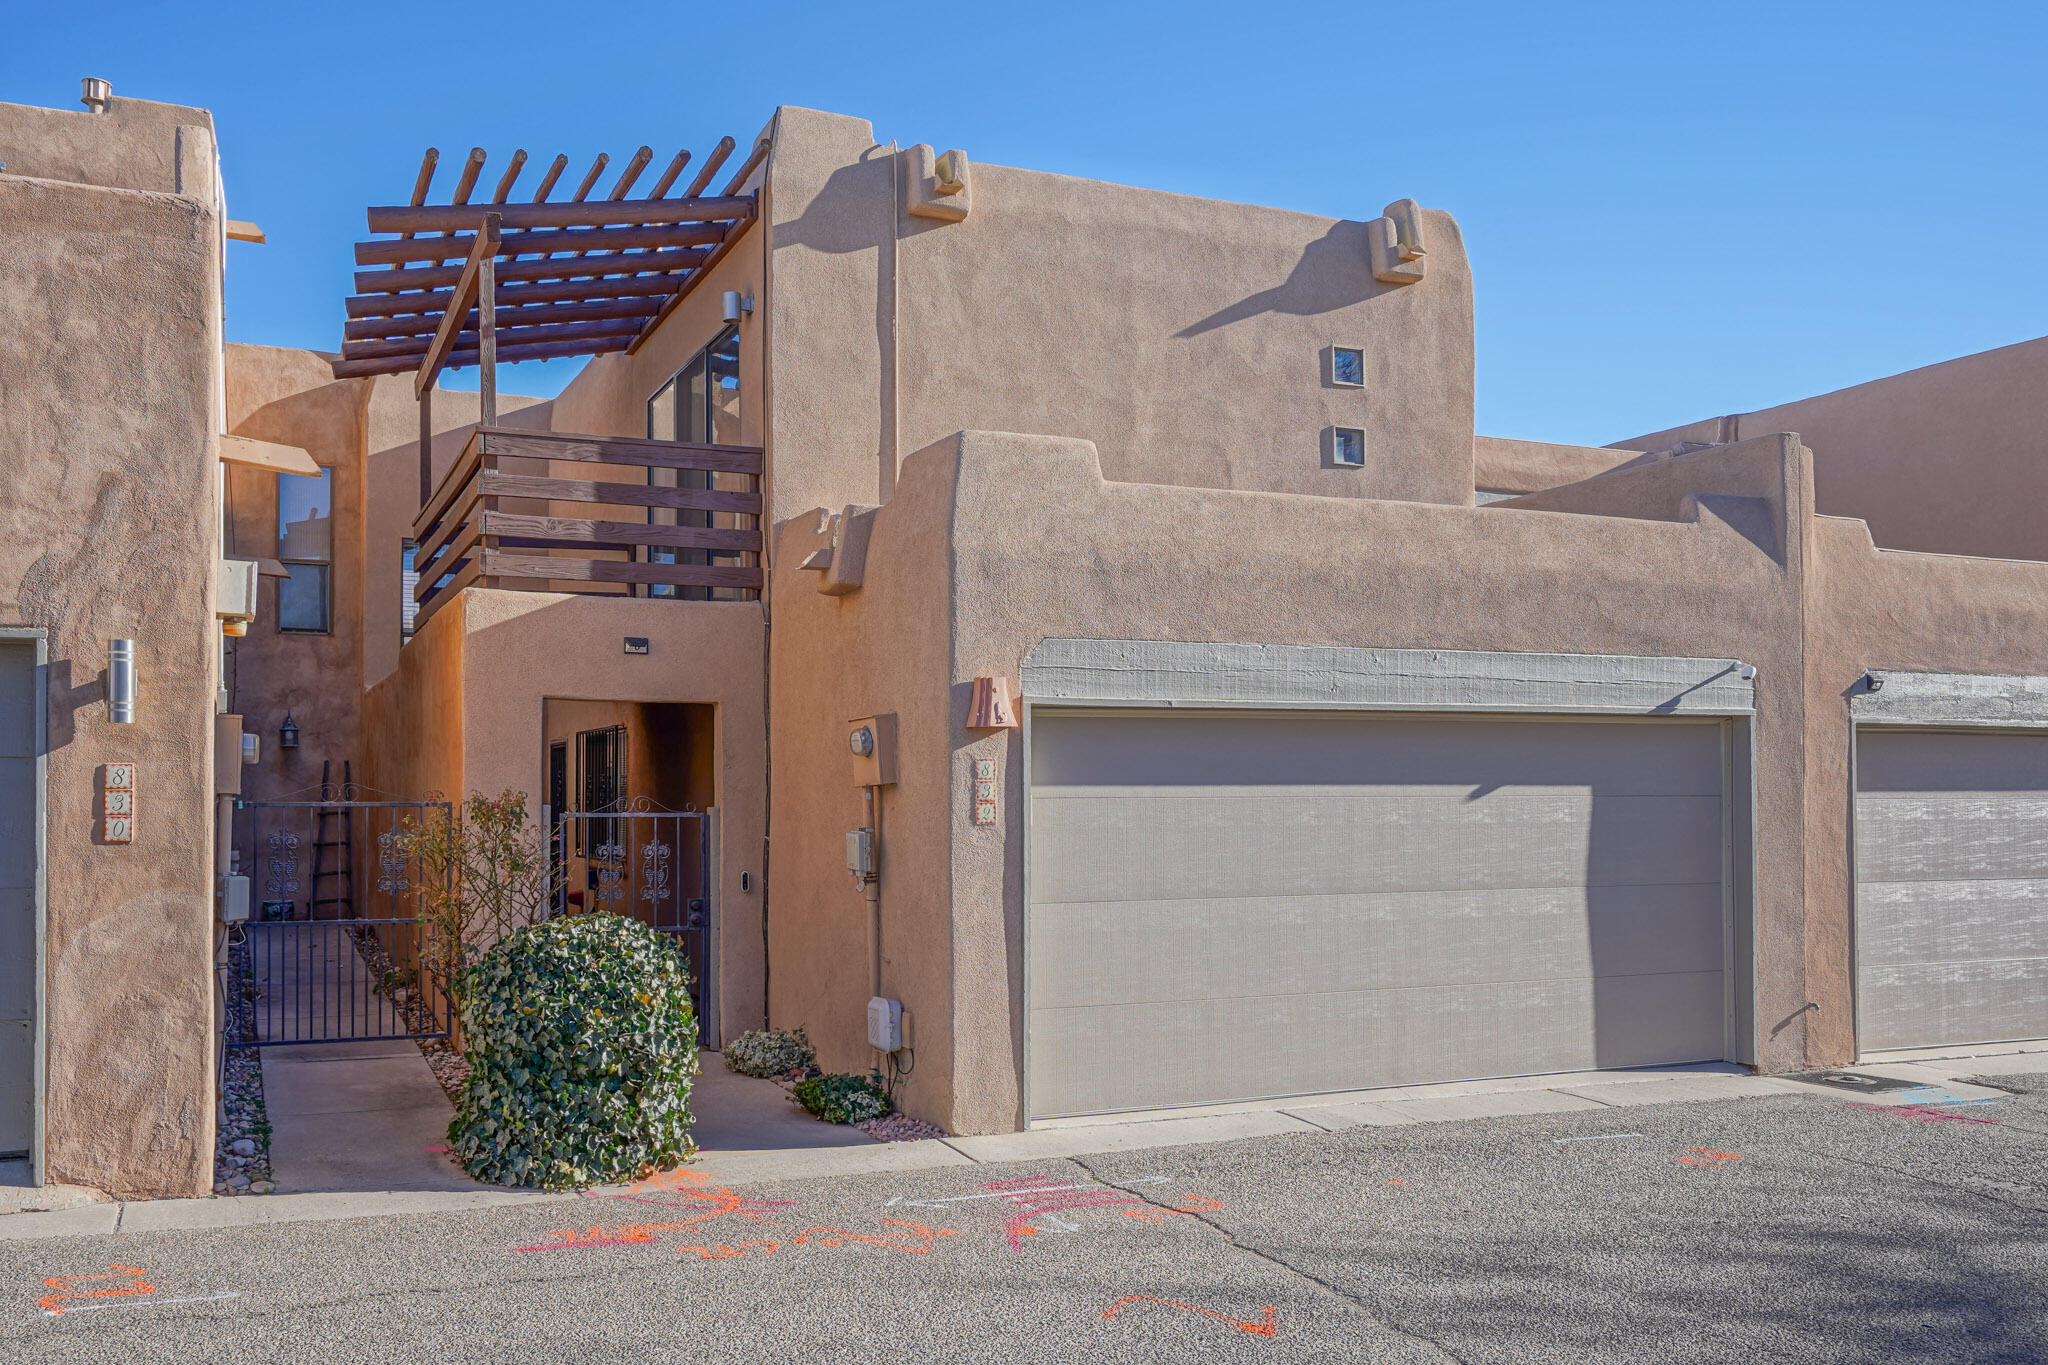 Open House Sat 1/22 from 2pm-4pm and Sun 1/23 from 12-2 pm!  Old Town/Downtown, Contemporary Living close distance to Sawmill District, Old Town, Chaco Hotel and Museums! Private Courtyard, patio and private deck off the master bedroom for lovely outdoor living. Some updates include newer appliances, blinds, light fixtures/fans, carpet and paint. Meticulously cared for home that is a must see.  Don't miss this unique opportunity! Take a virtual walkthrough tour today or schedule a private showing!